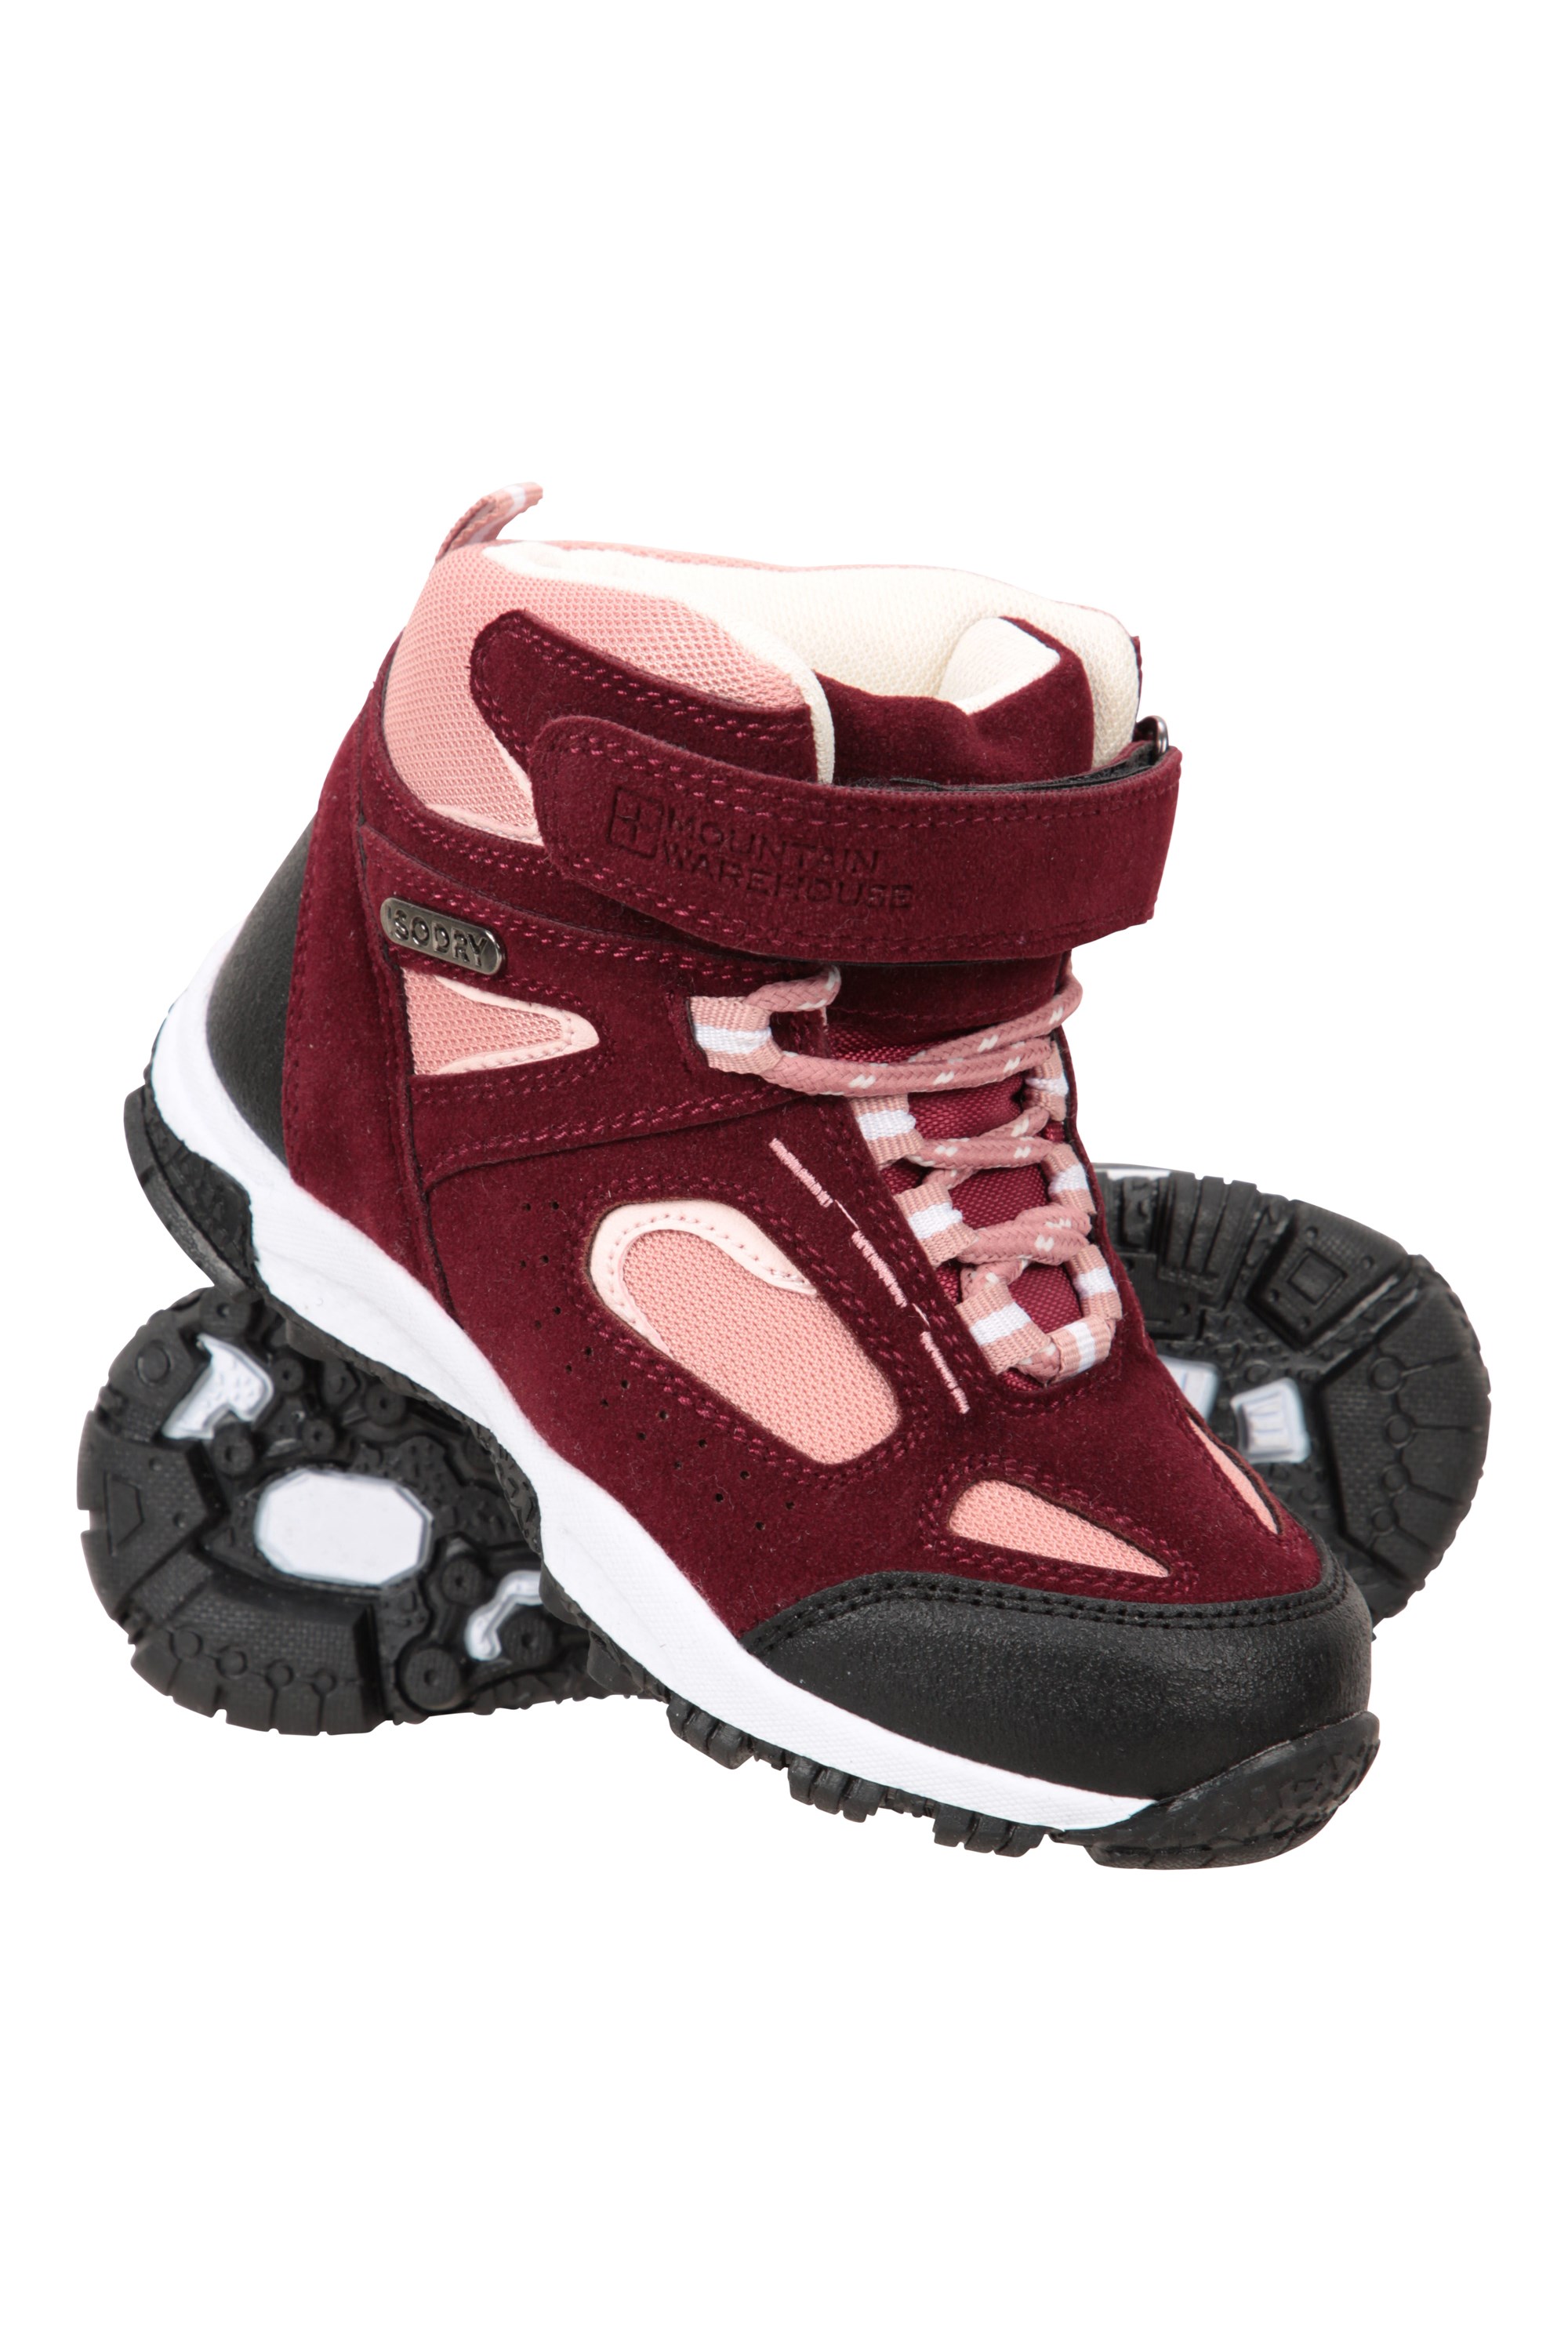 Forest Toddler Waterproof Boots - Burgundy